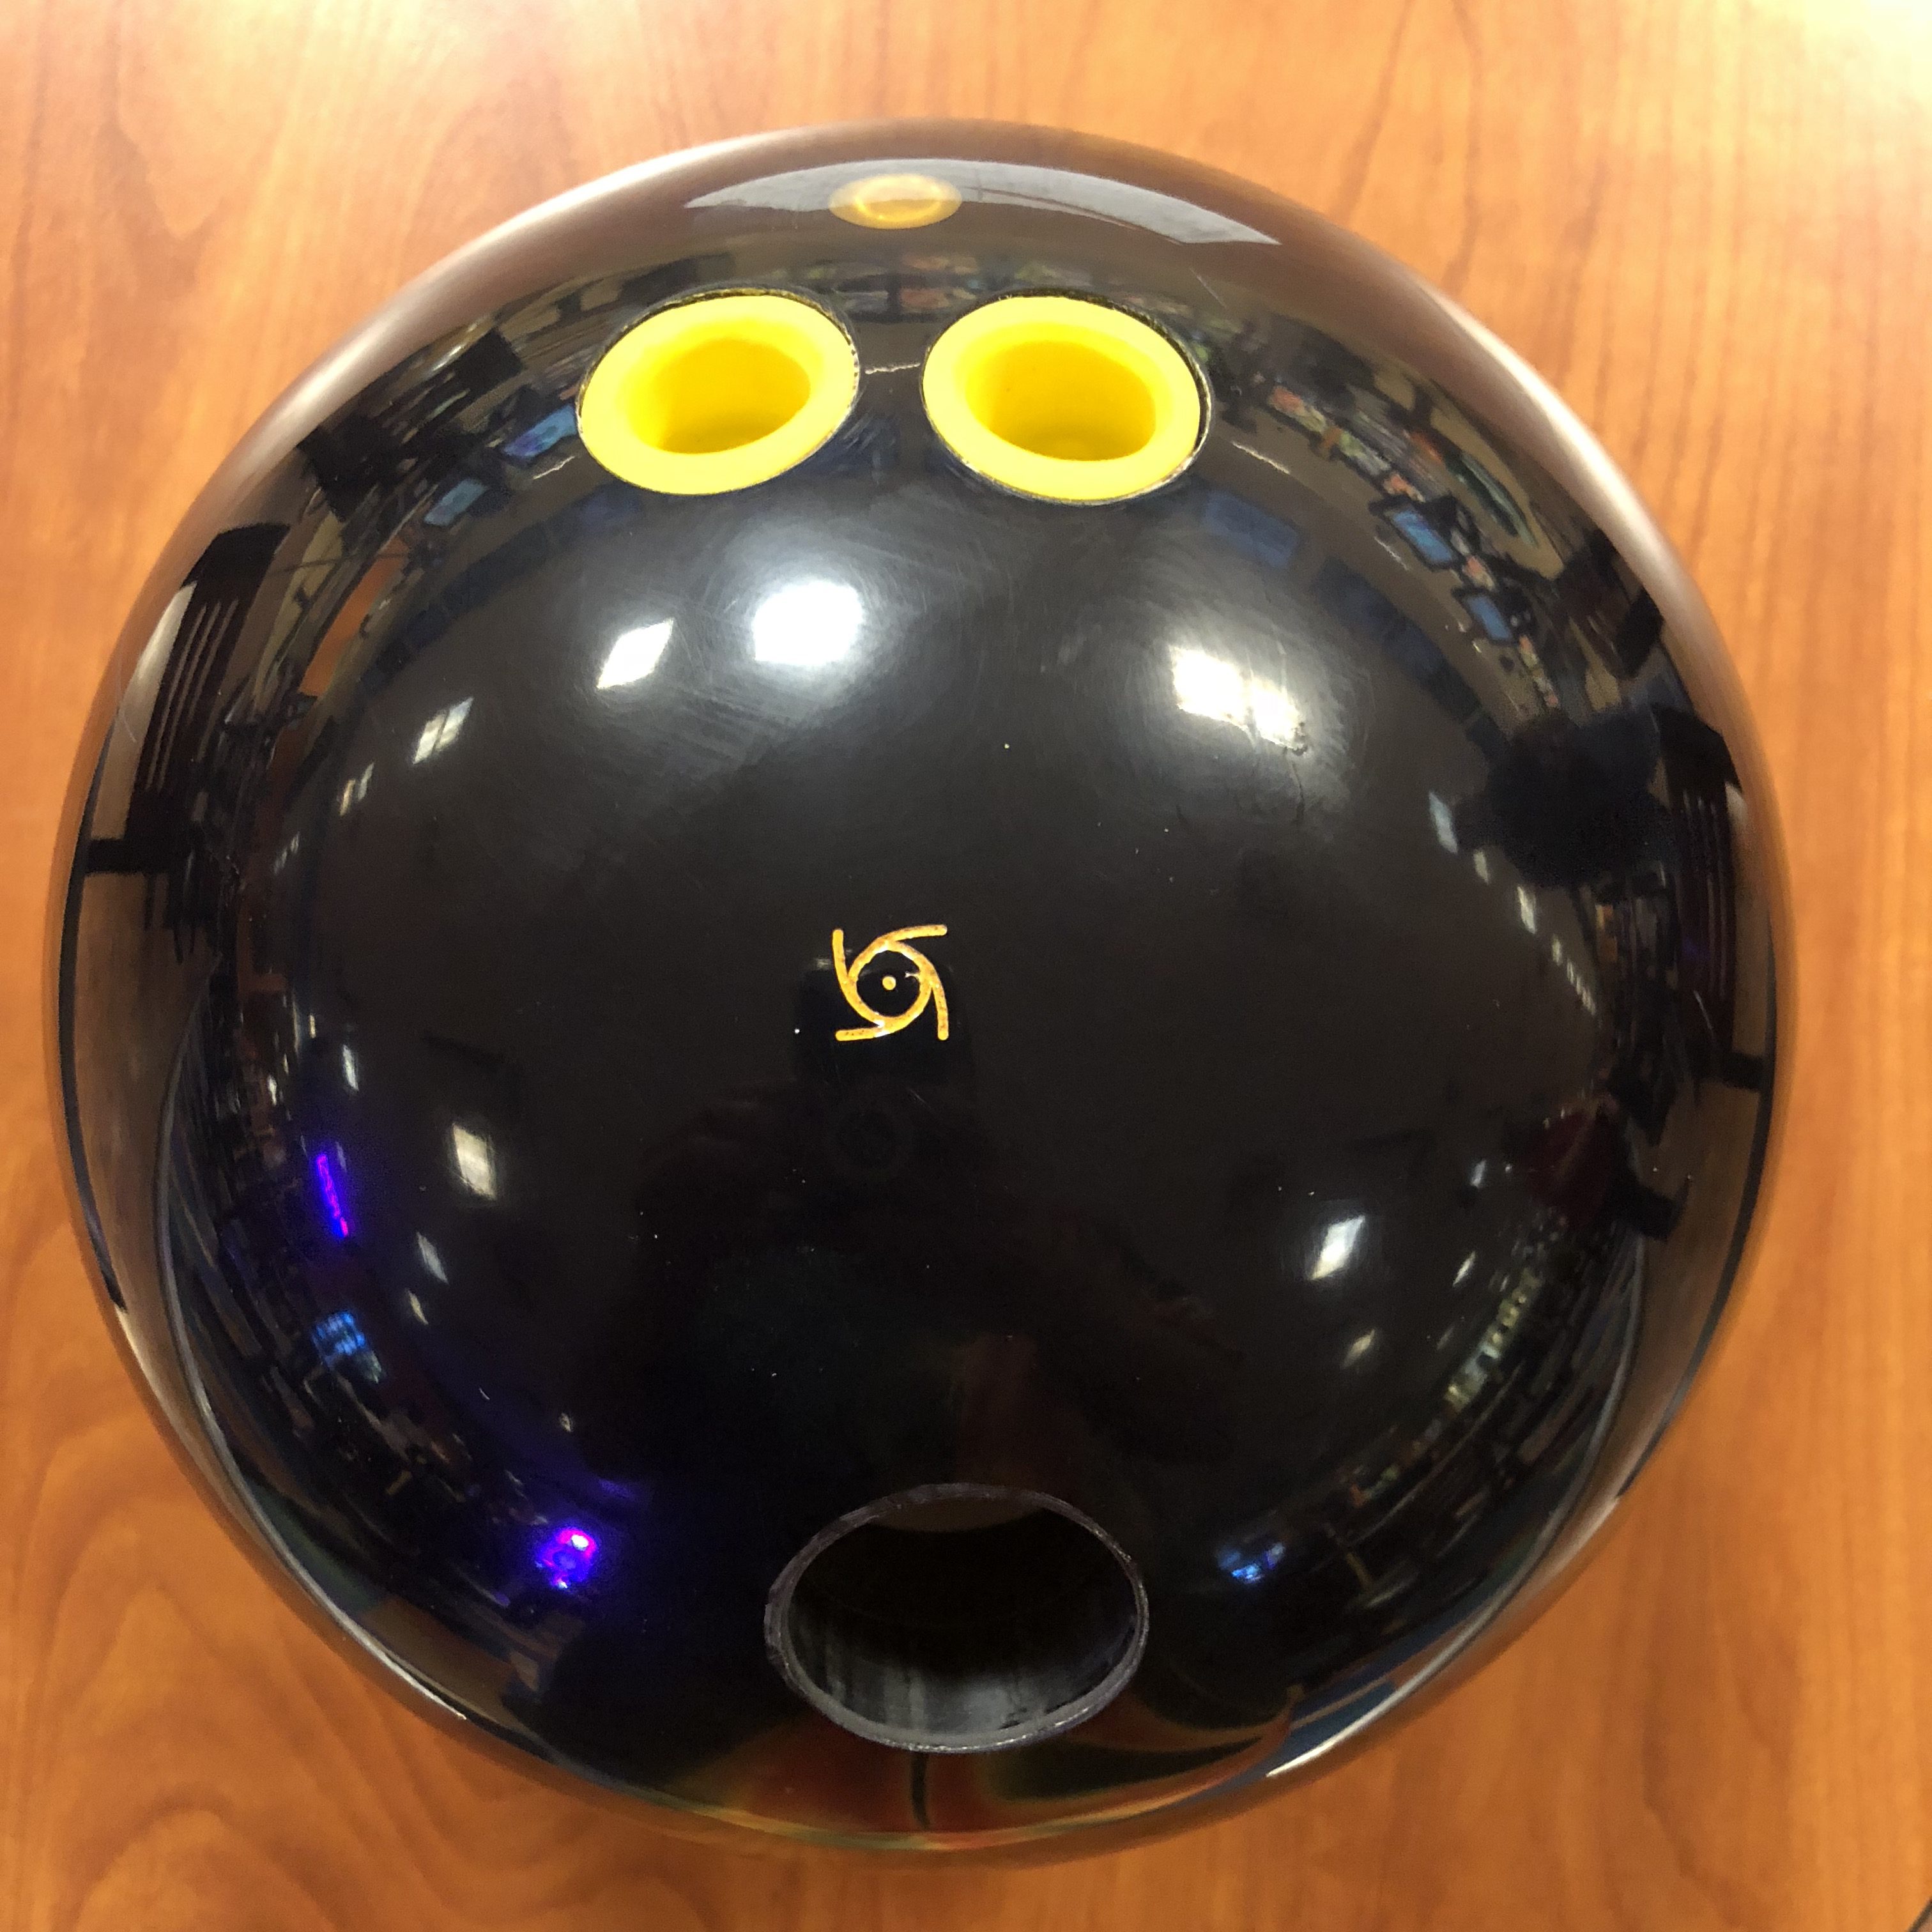 Storm Hy-Road X Bowling Ball Review